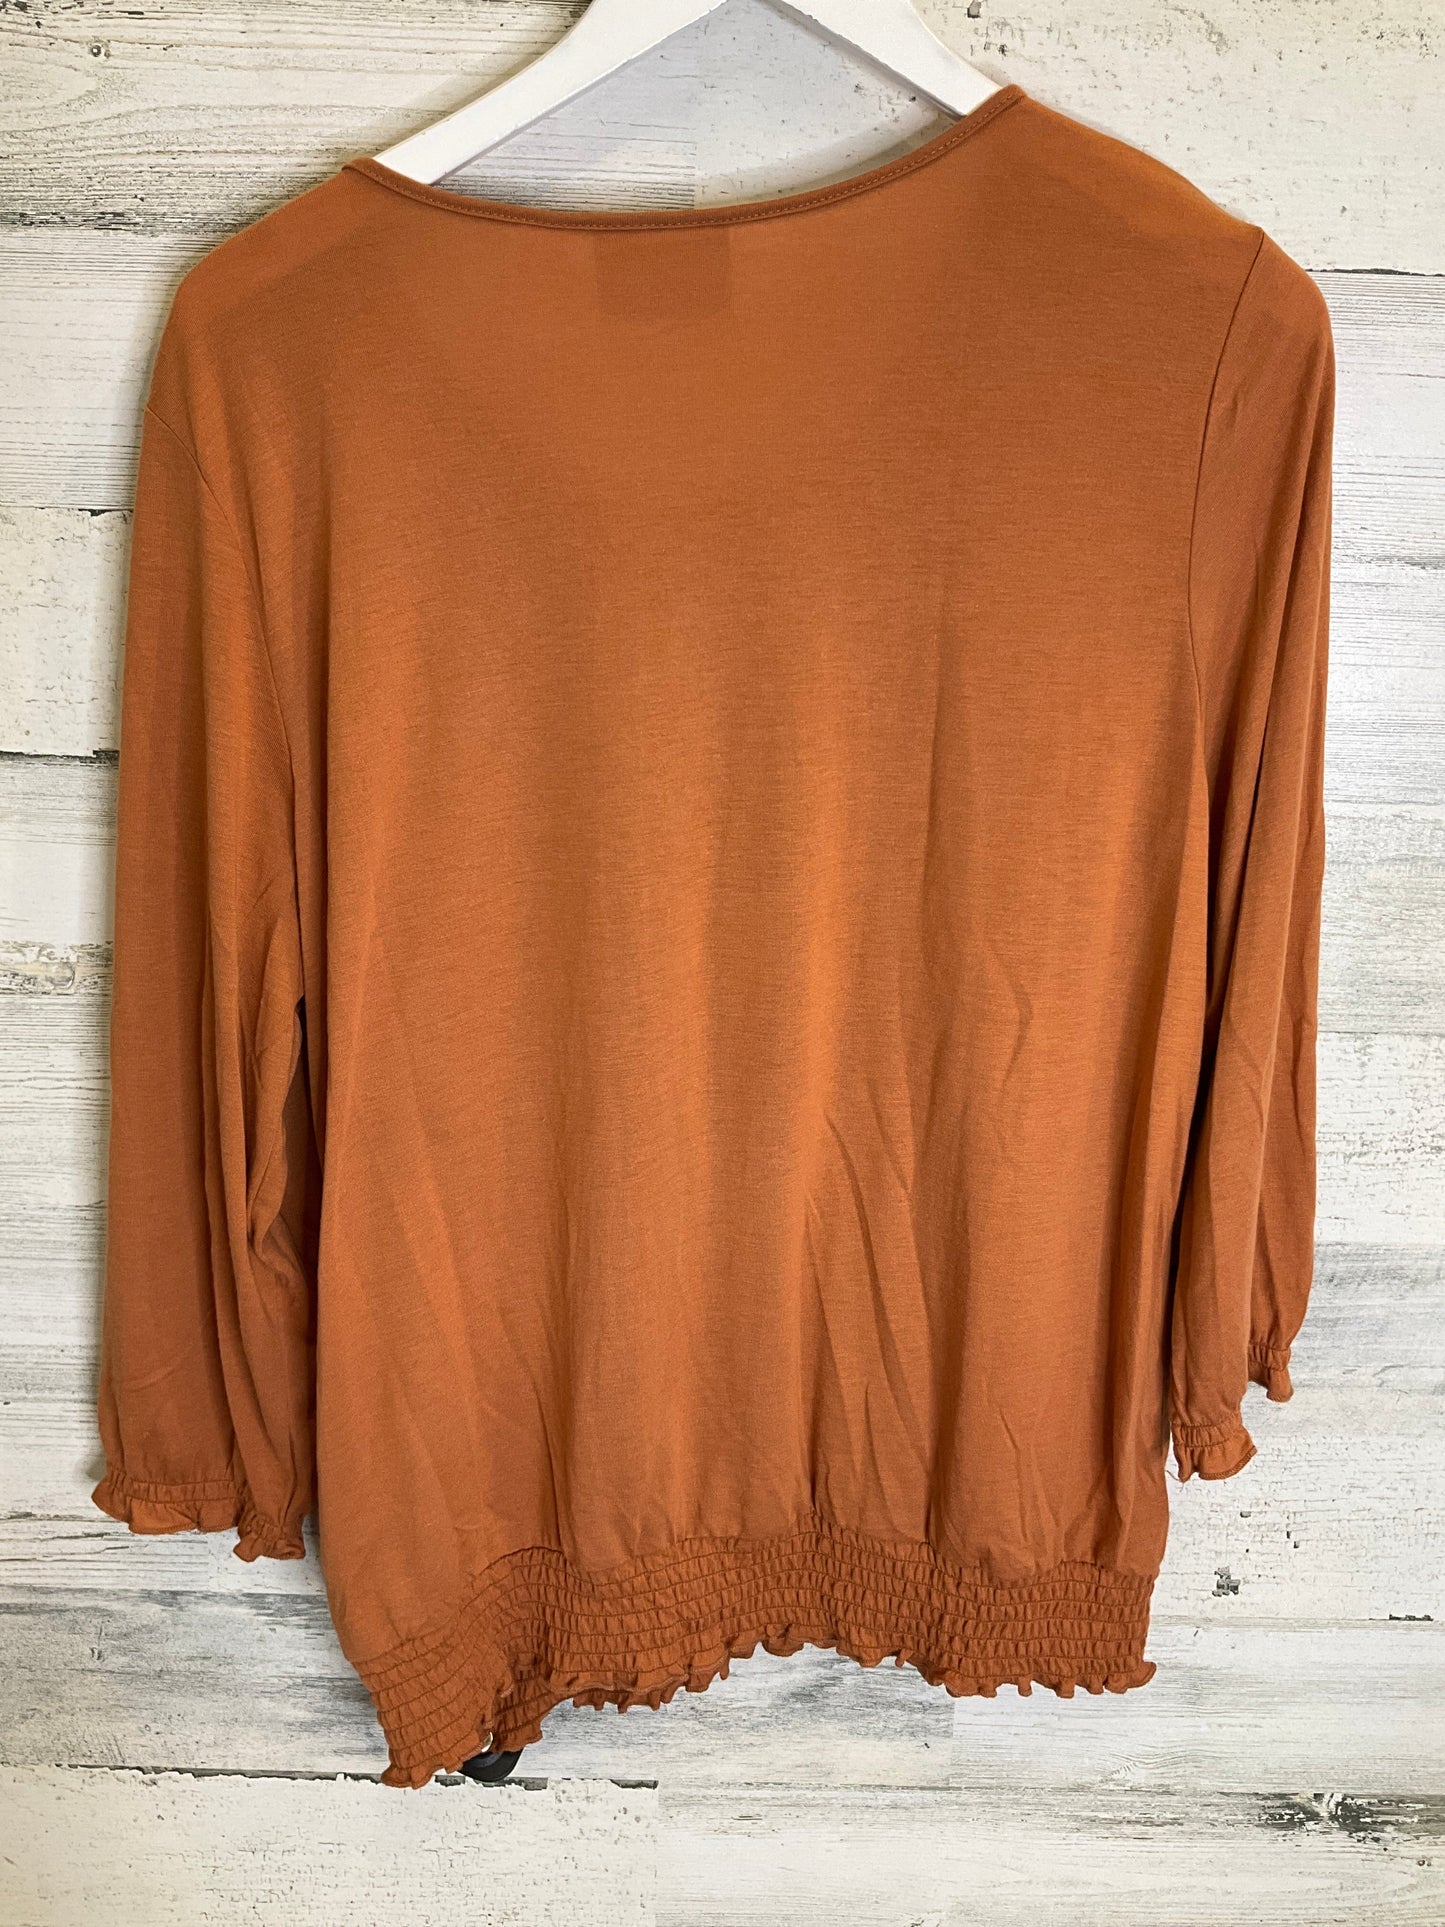 Orange Top Long Sleeve Alfred Dunner, Size M